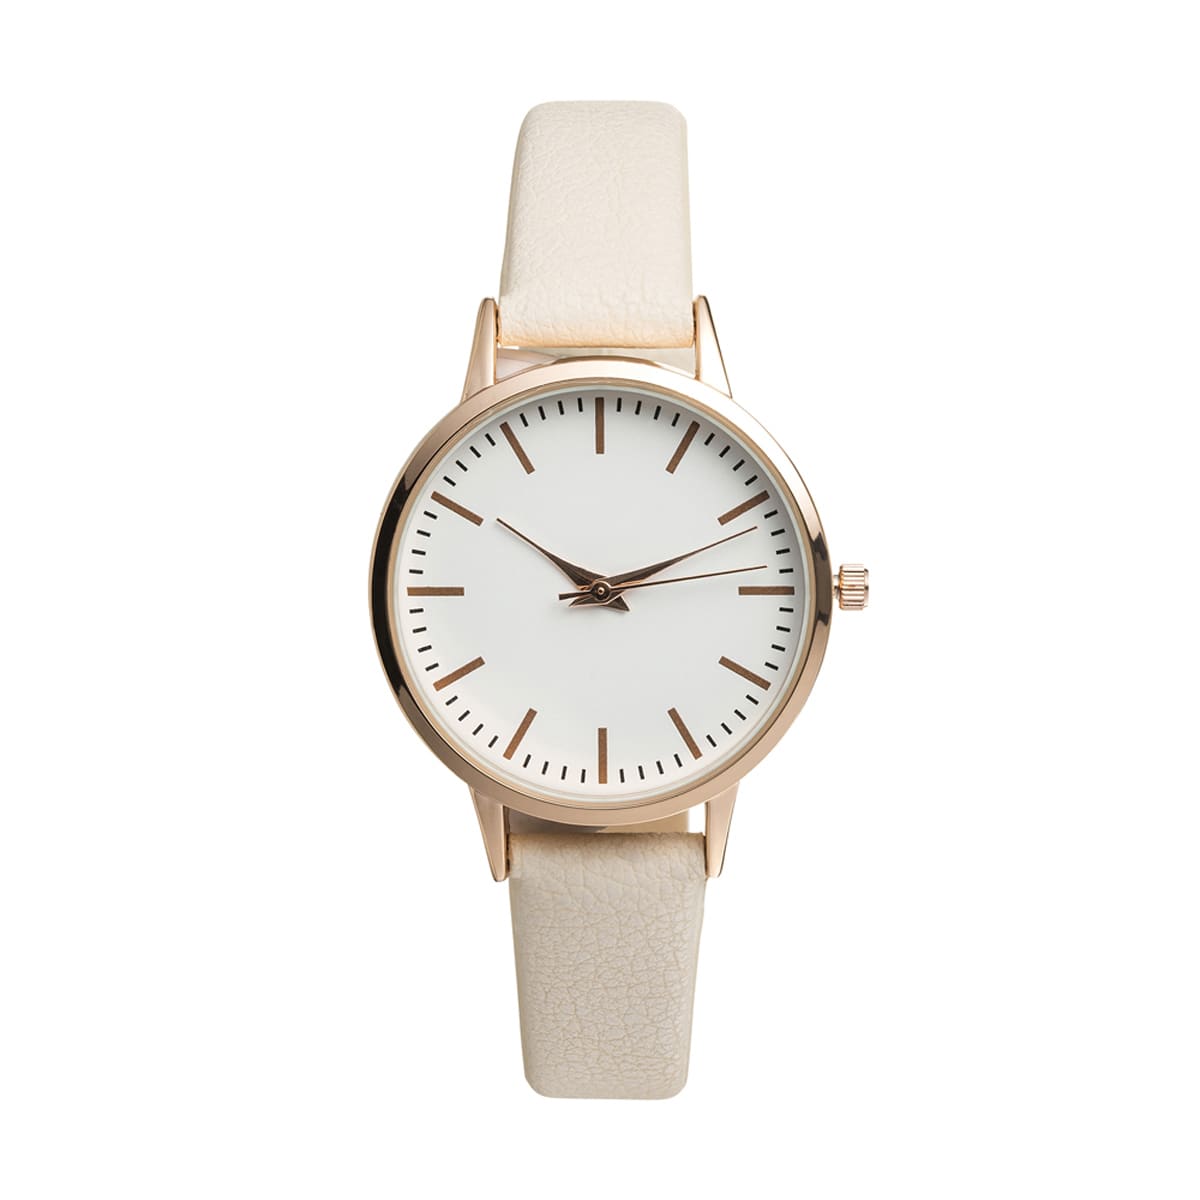 Kmart.com | Womens watches, Stylish watches, Watches